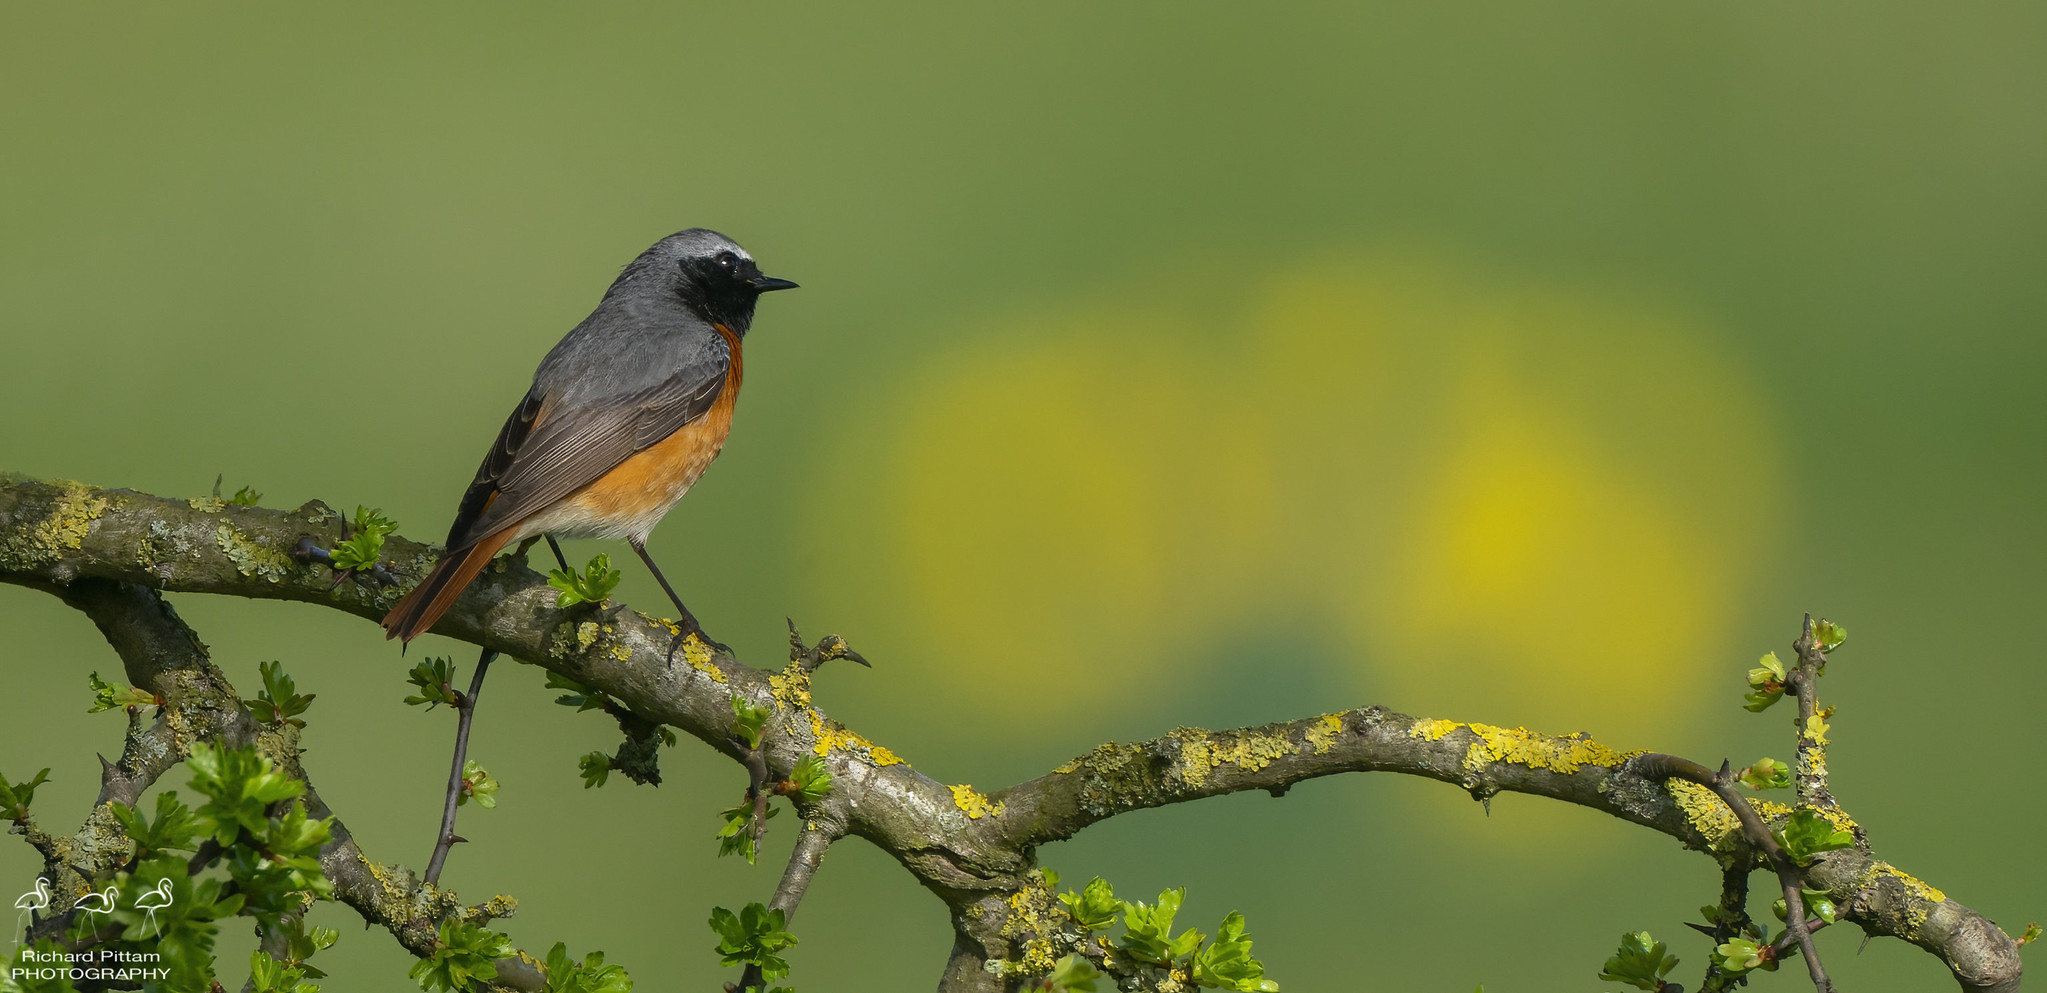 Common Redstart with Cowslip backdrop